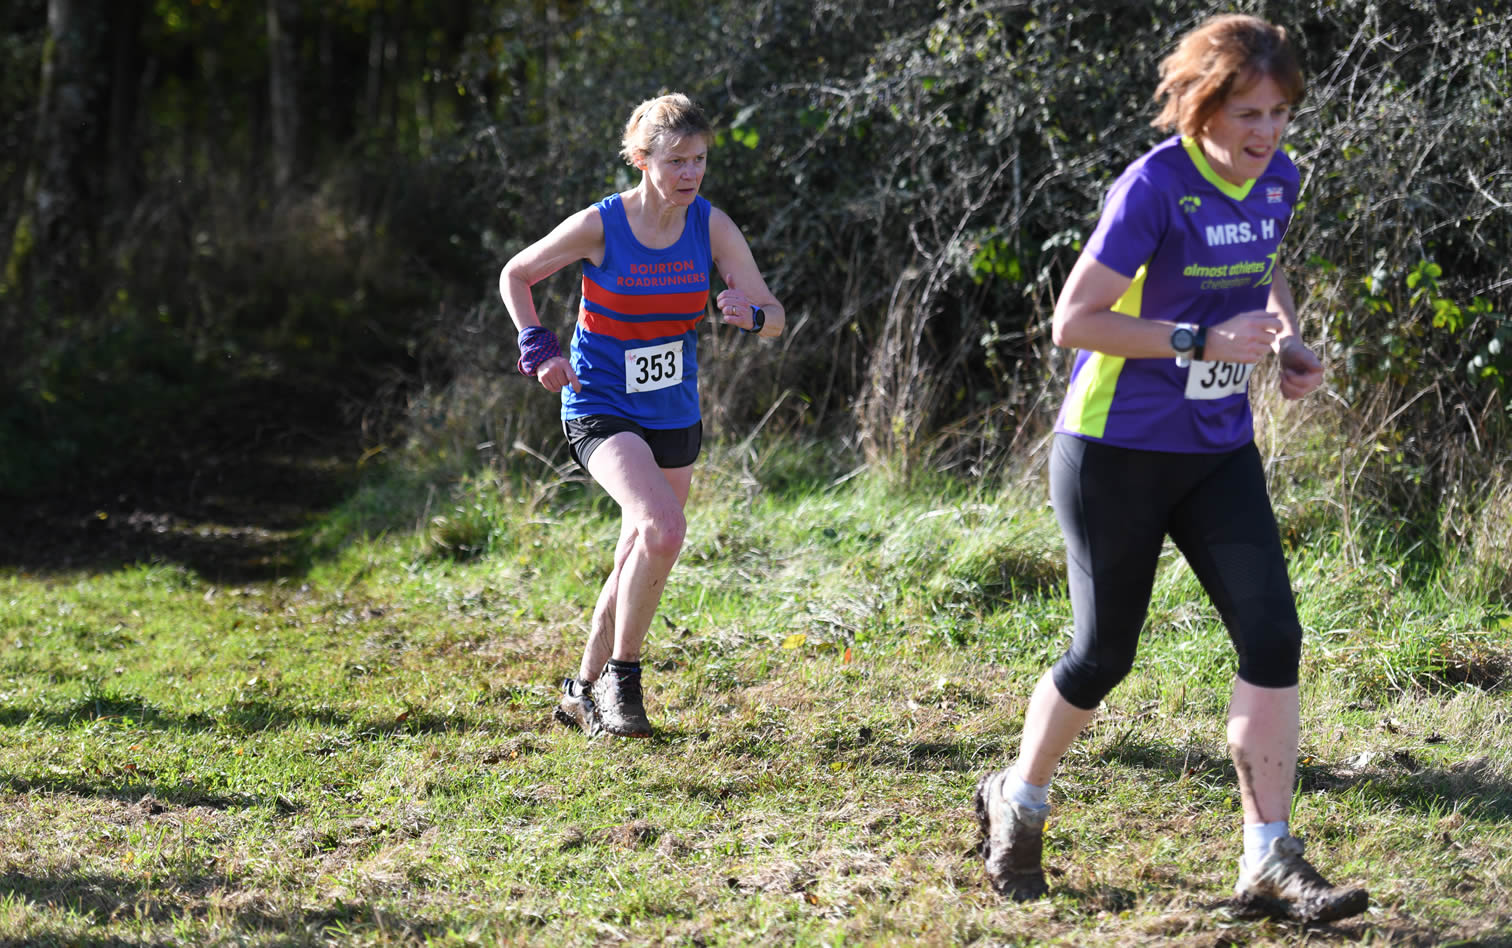 Susan Hunt at Gloucestershire AAA Cross Country League, Cirencester Park - 30th October 2021